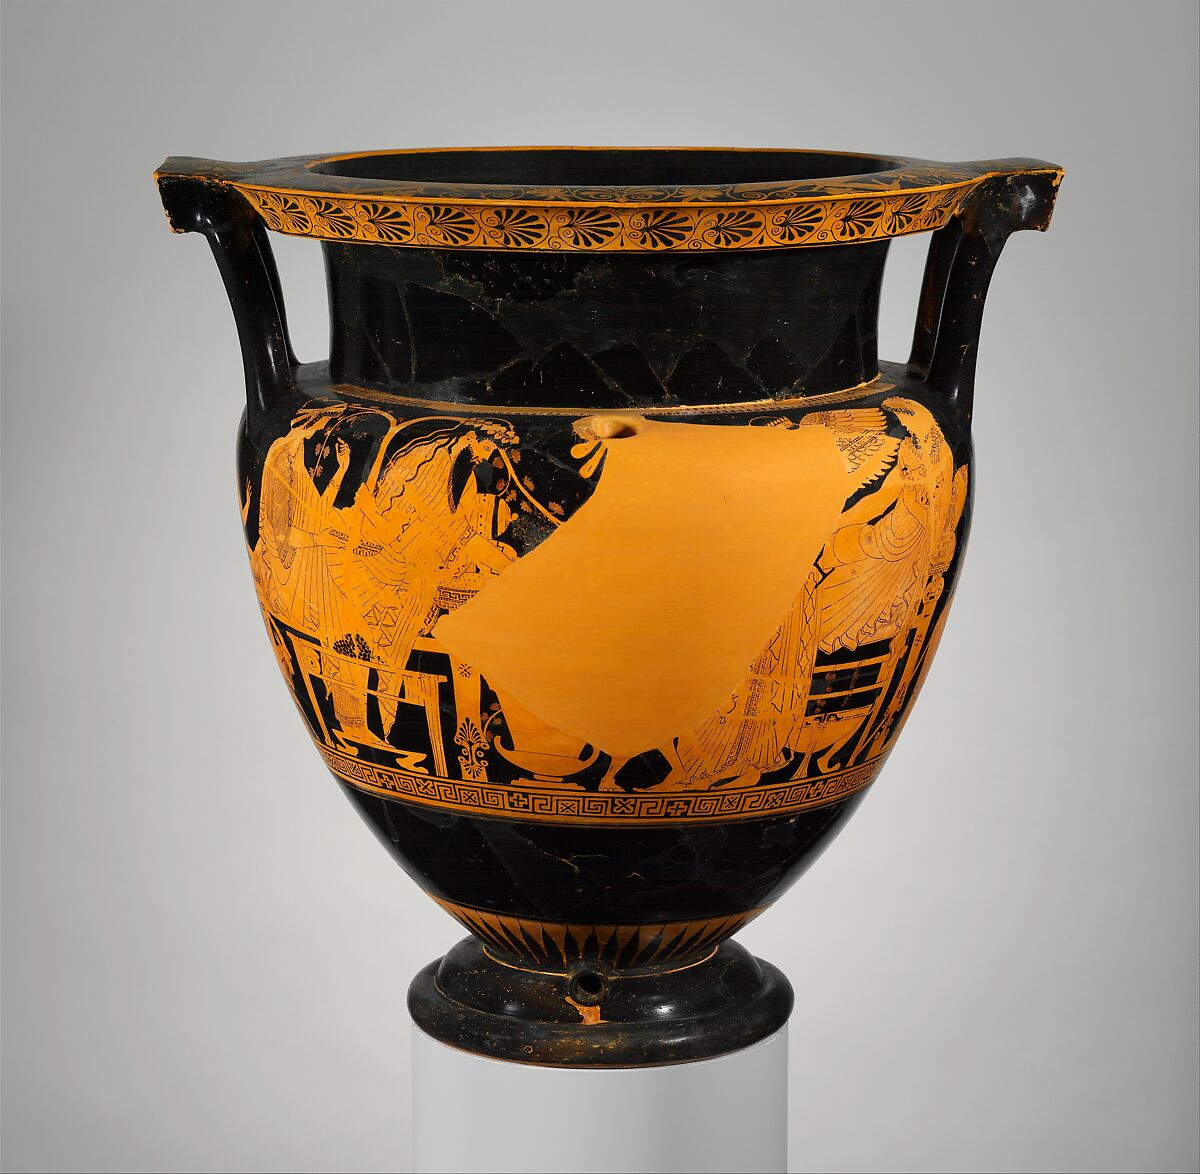 Terracotta psykter-column-krater (vase for chilling and mixing wine and water), Attributed to the Troilos Painter, Terracotta, Greek, Attic 